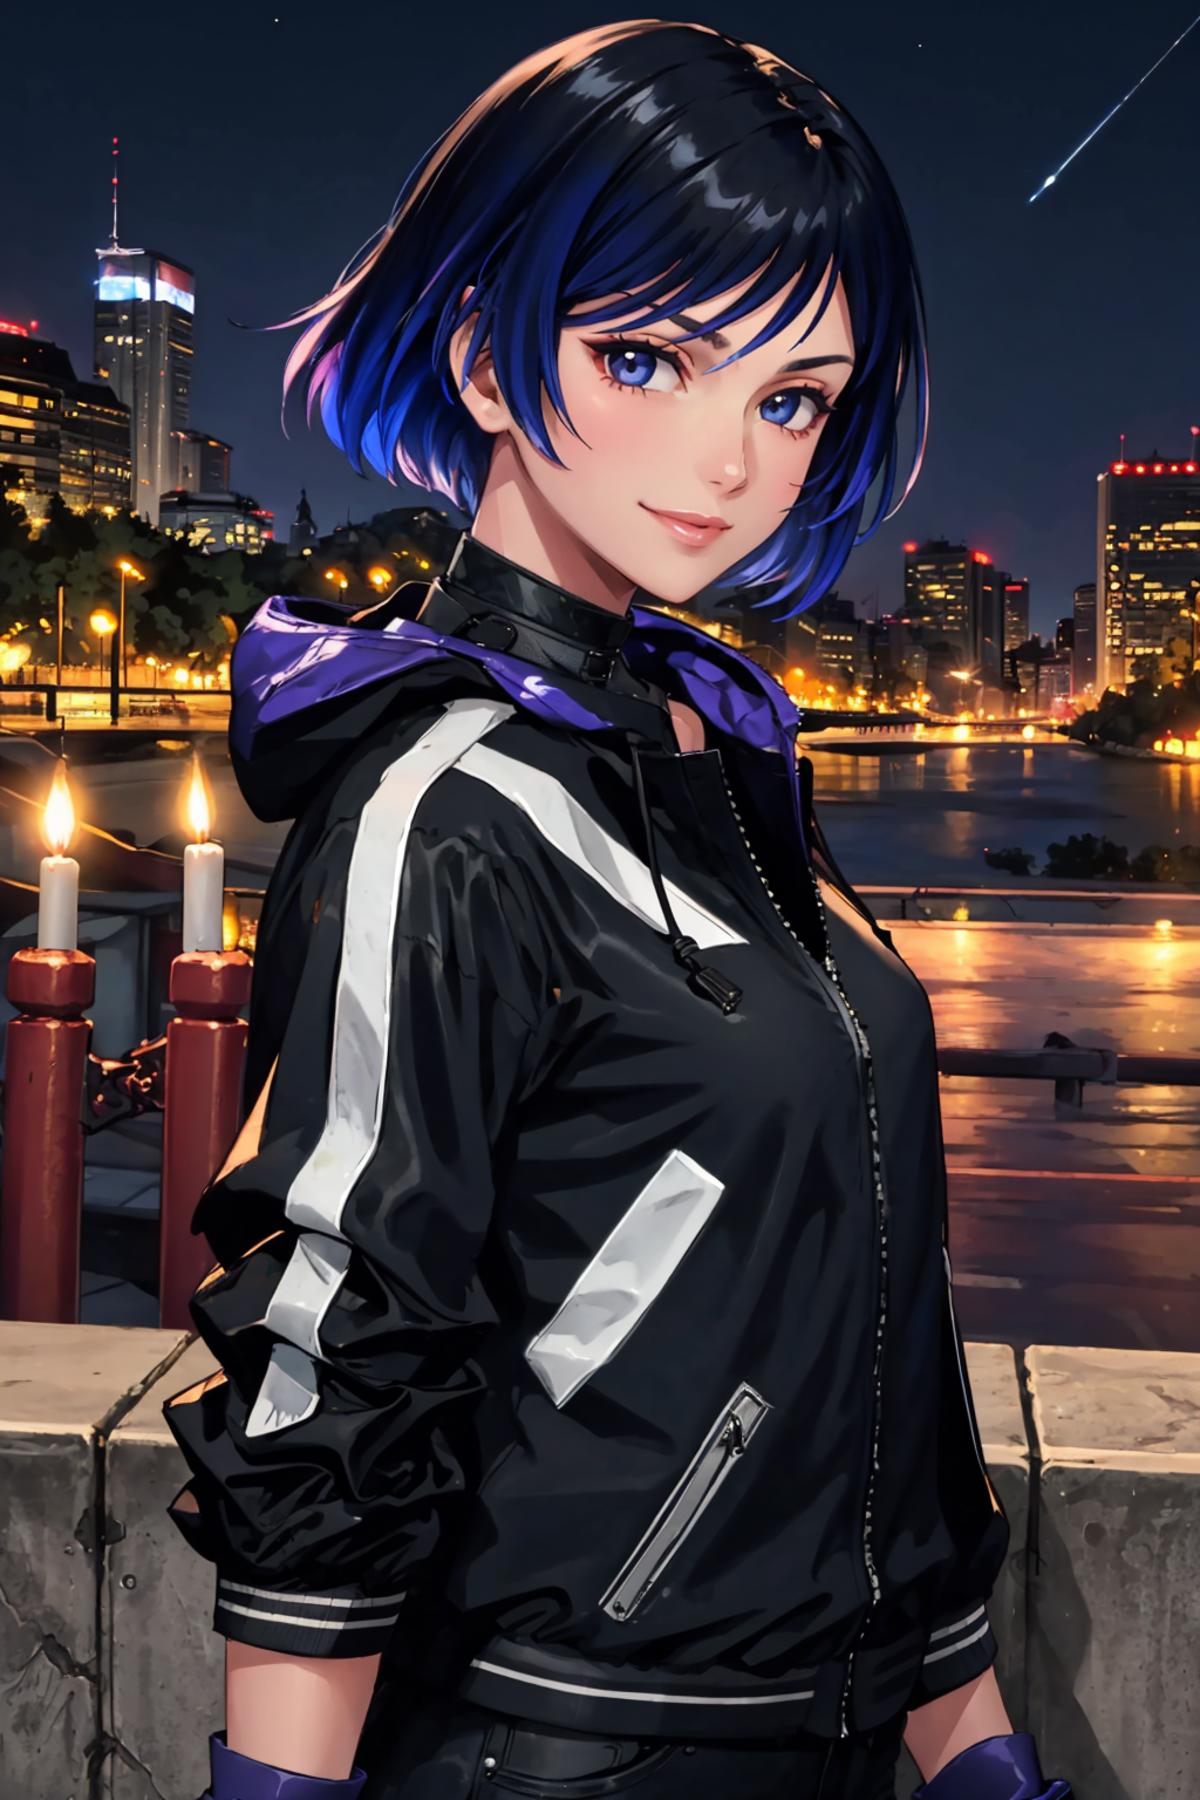 Anime drawing of a blue haired girl wearing a black and white jacket.